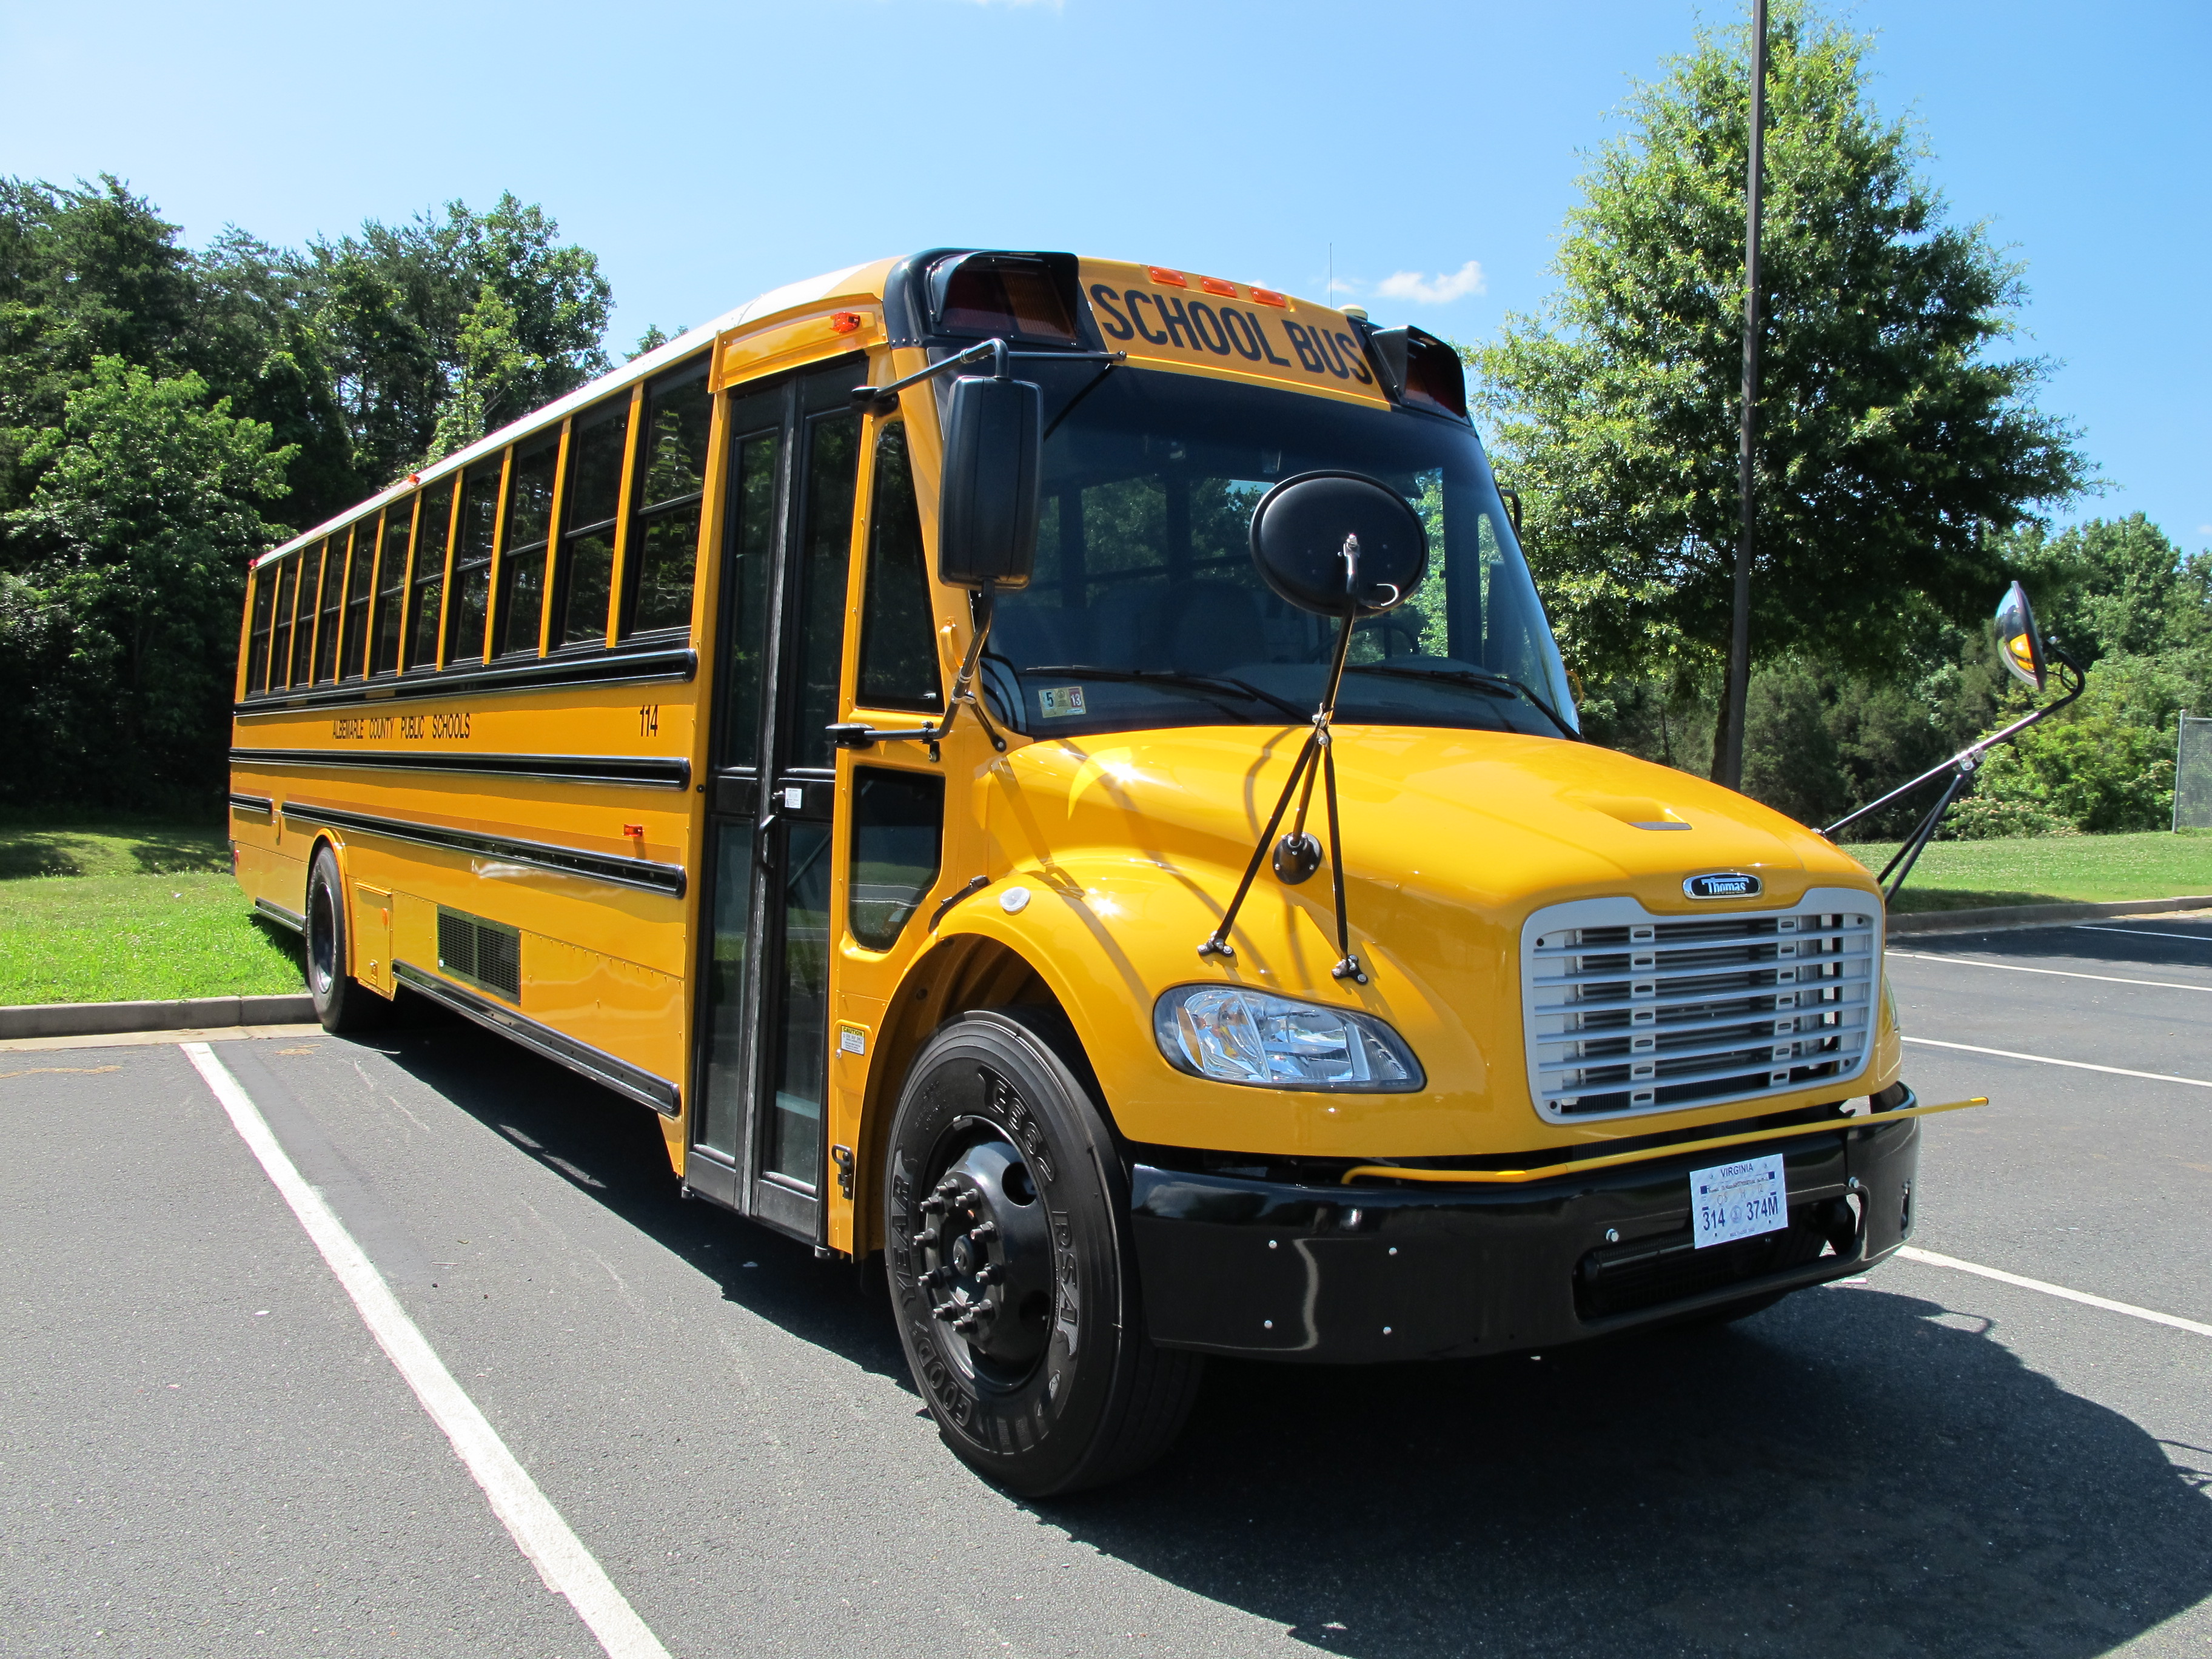 Opinion – BHS has a good policy of not adjusting the buses schedule on late starts